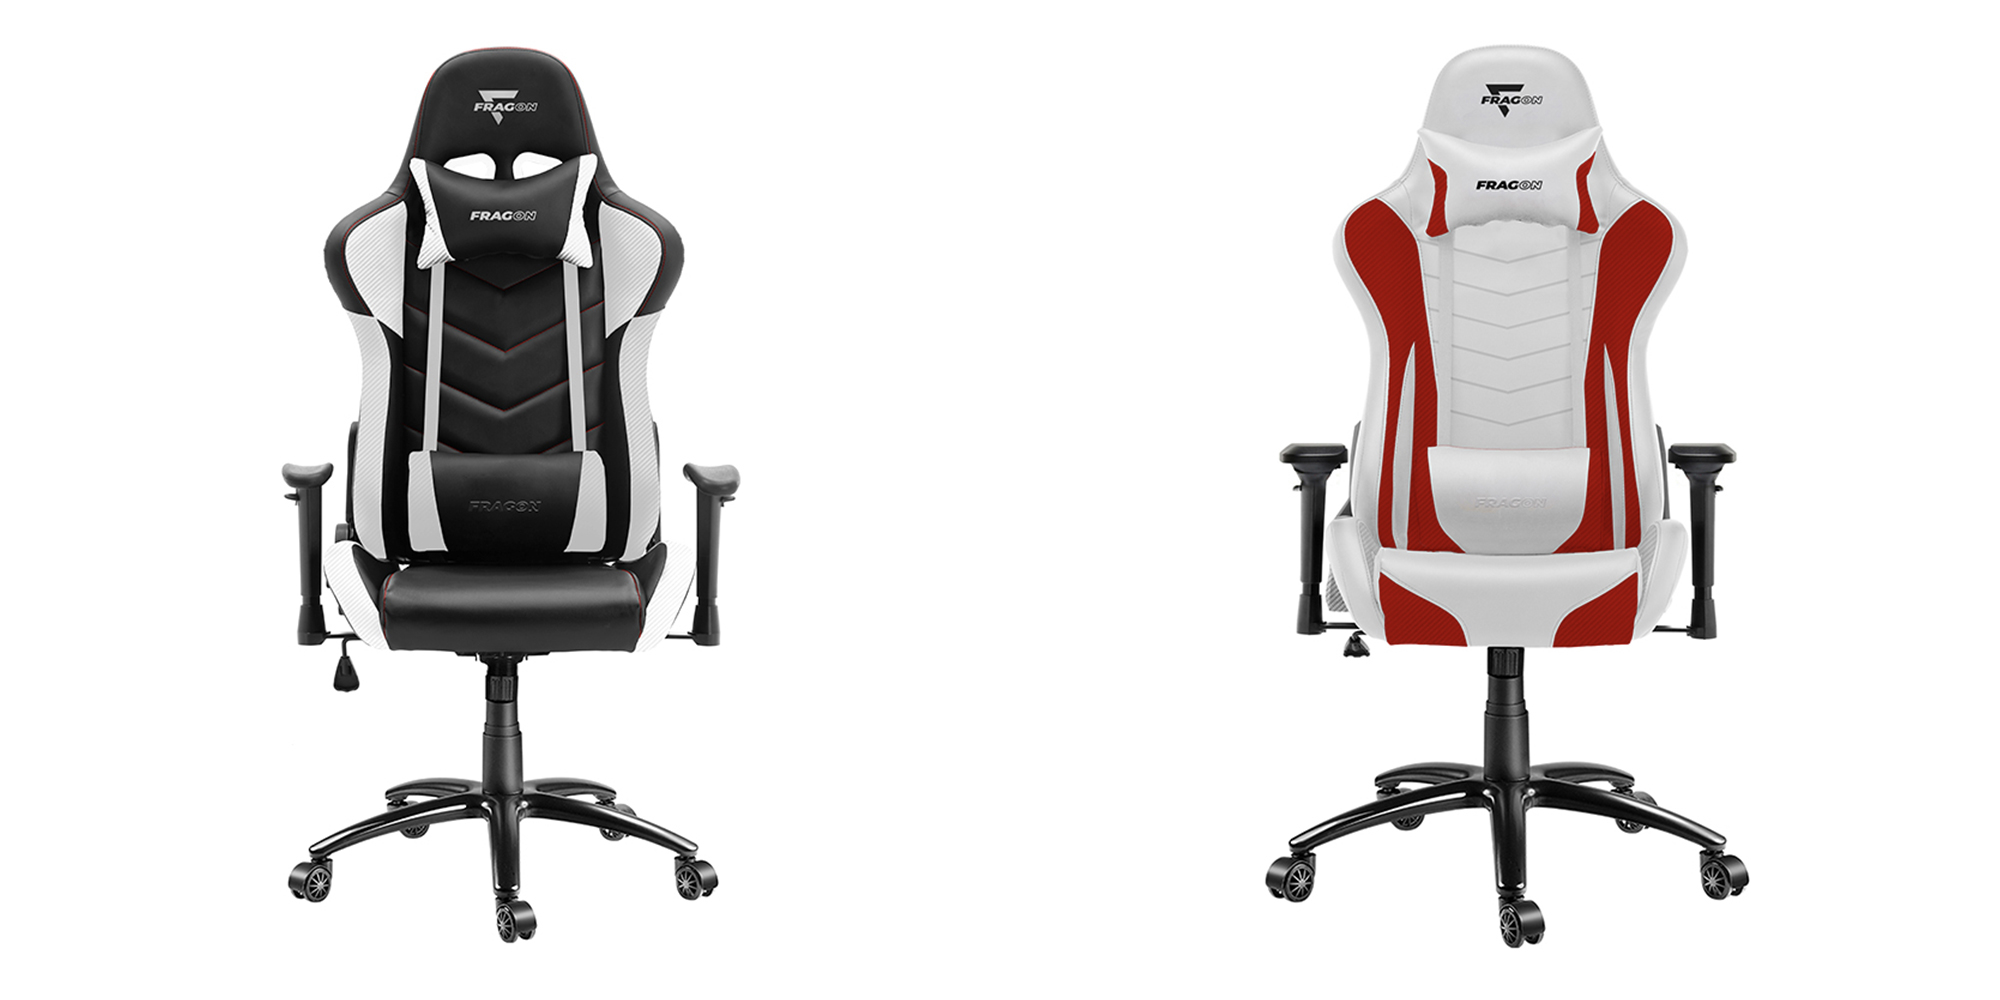 FS Holding starts the production of gaming chairs under the FragON brand